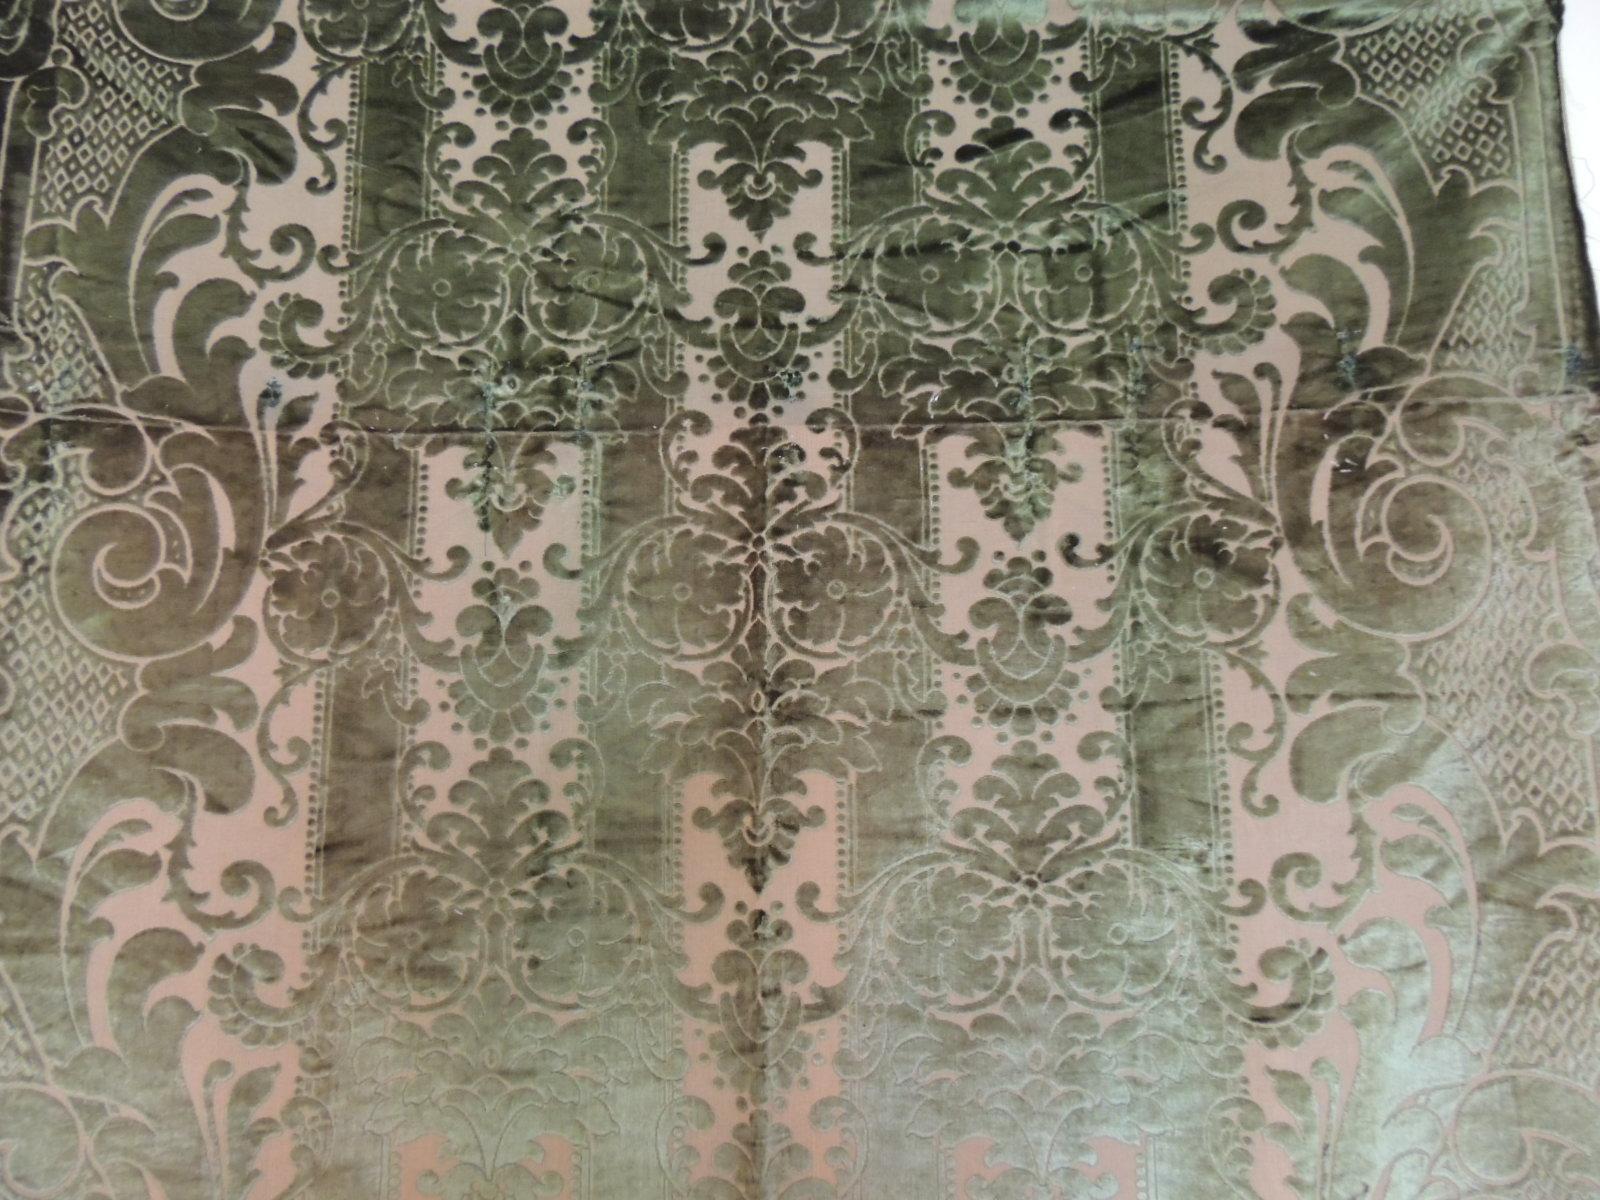 Antique French green silk velvet Gaufrage Drapery panel.
Ideal for upholstery pillows or curtains.
Size: 48.5